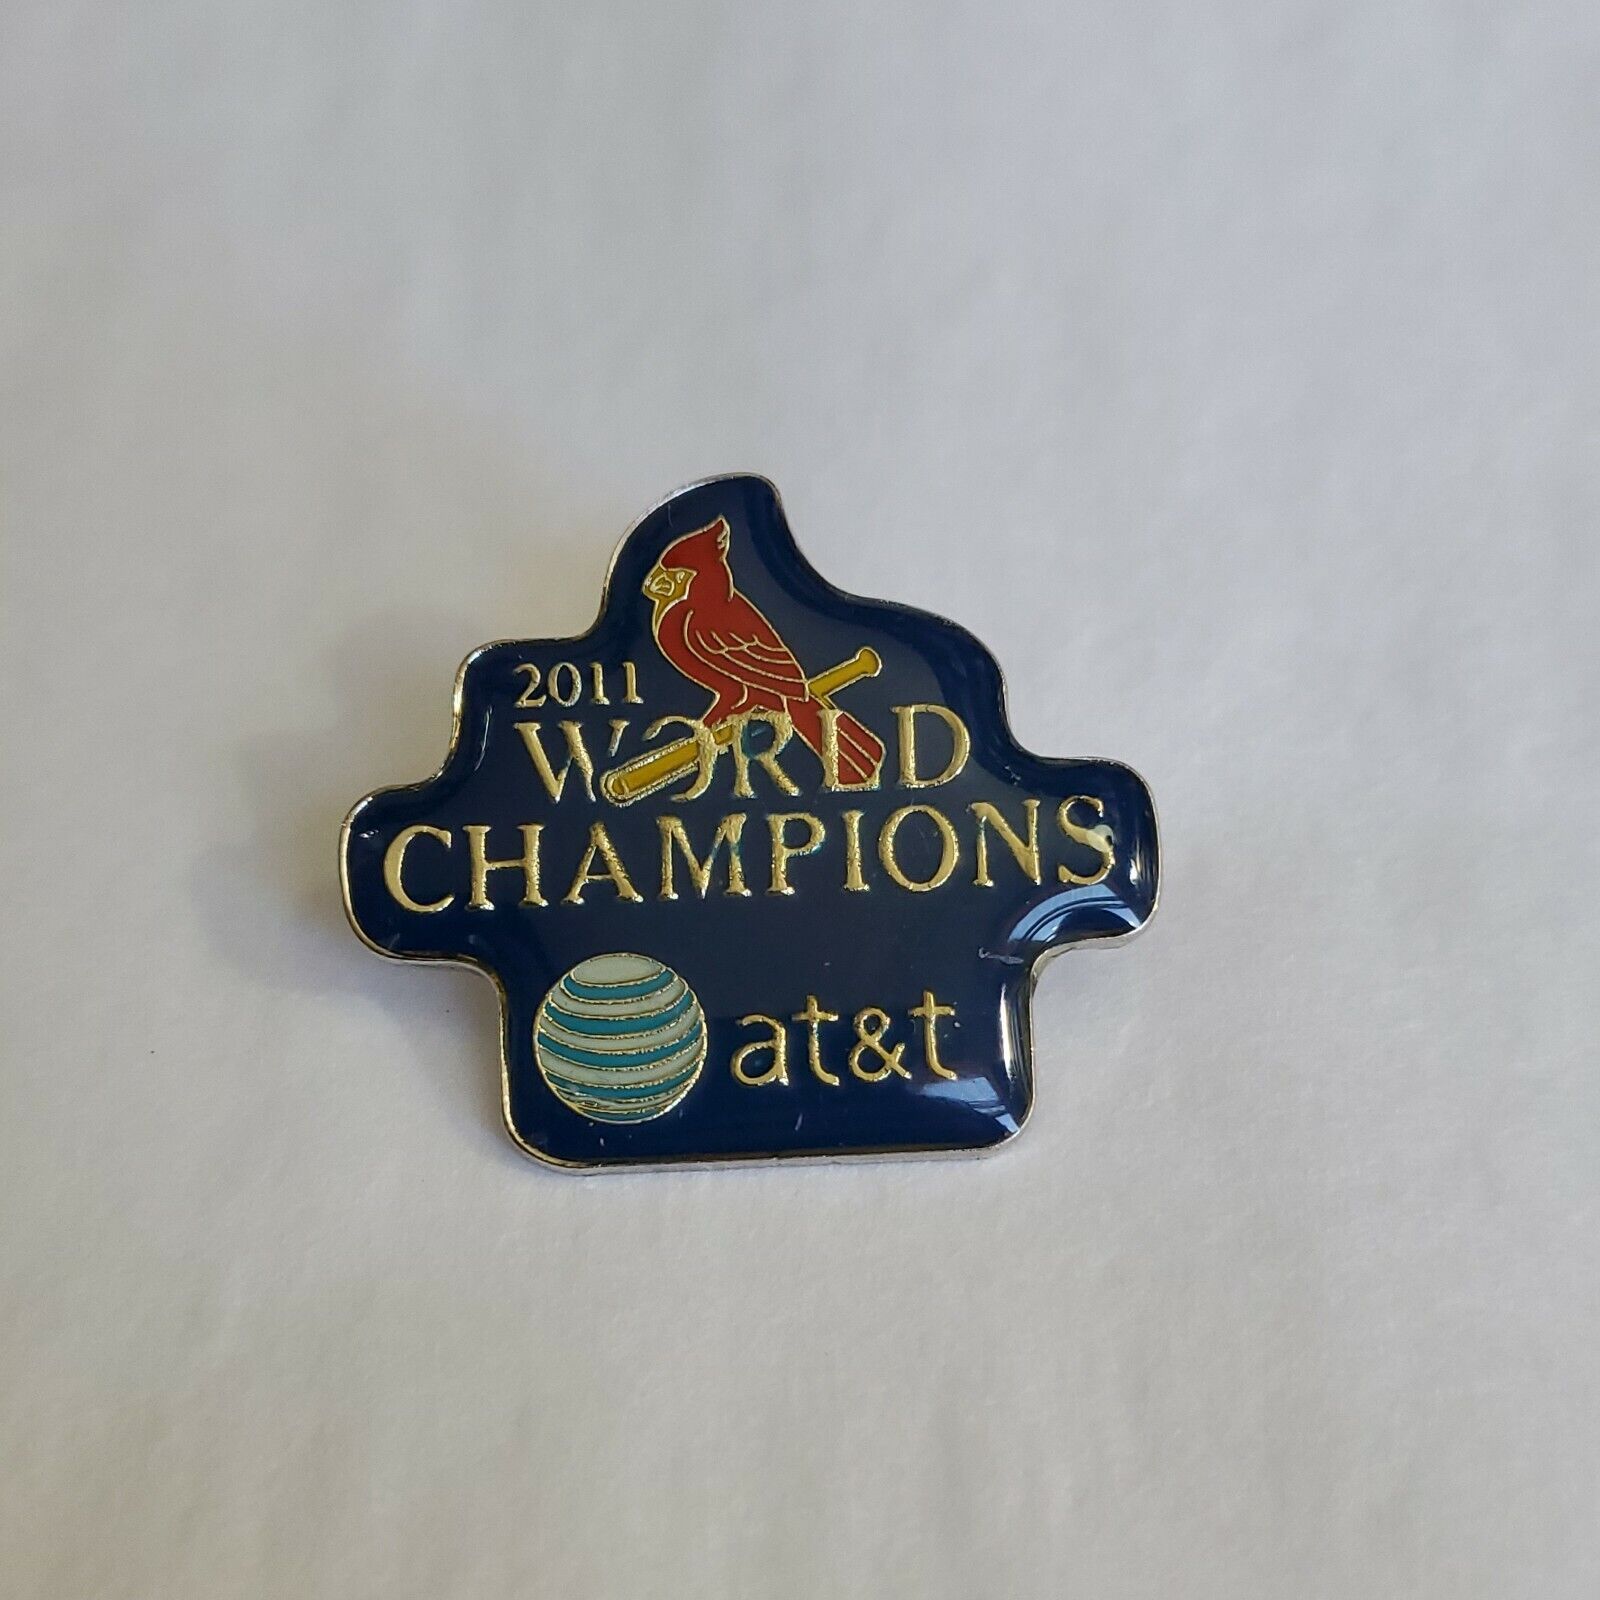 St Louis Cardinals 2011 World Champions Lapel Hat Jacket Pin Sponsored by AT&T